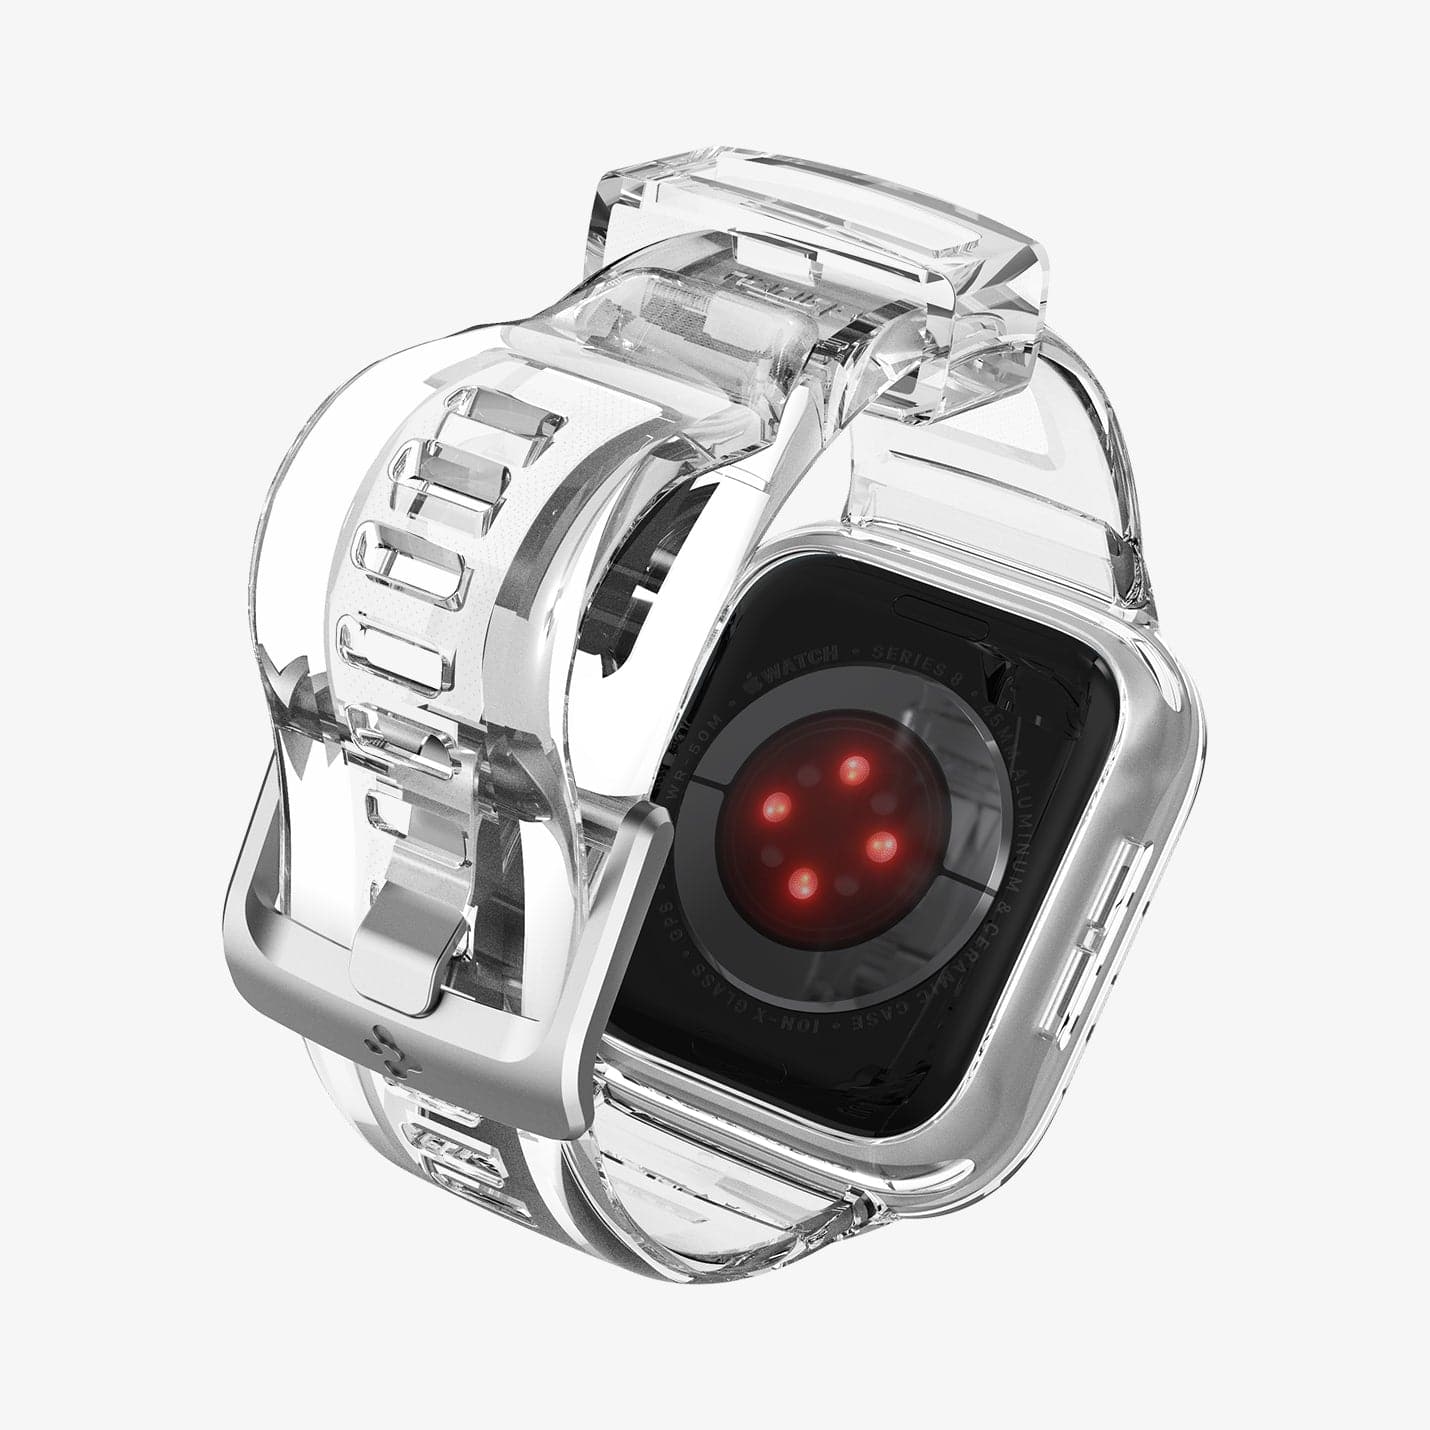 ACS02006 - Apple Watch Series (Apple Watch (45mm)) Case Liquid Crystal Pro in crystal clear showing the back and inside of band